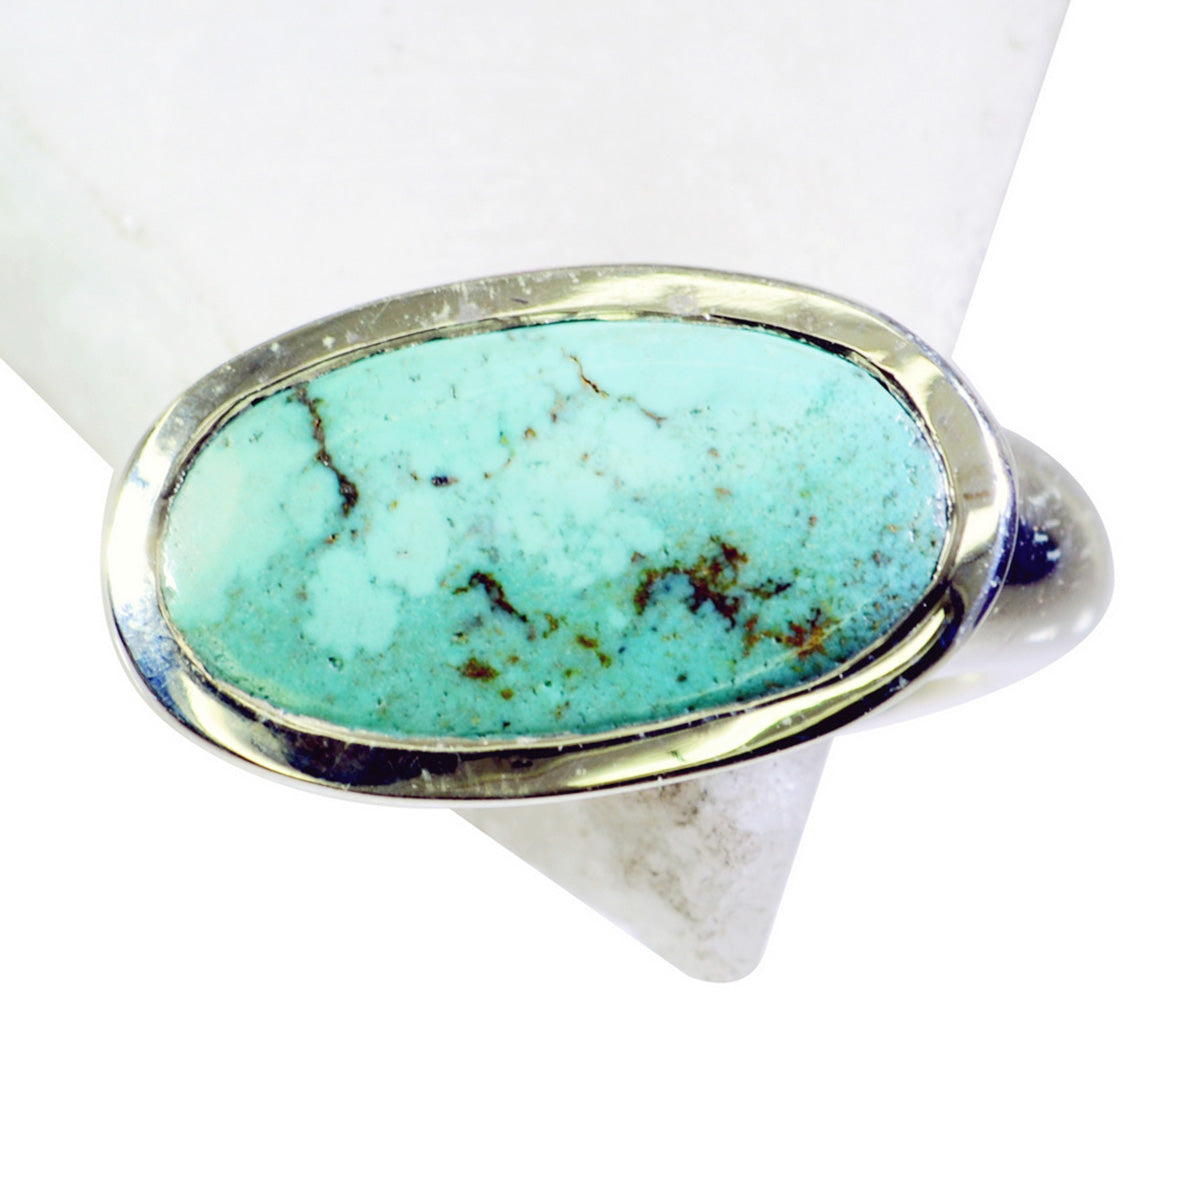 Riyo Reals Gemstones Turquoise Solid Silver Ring Online Jewelry